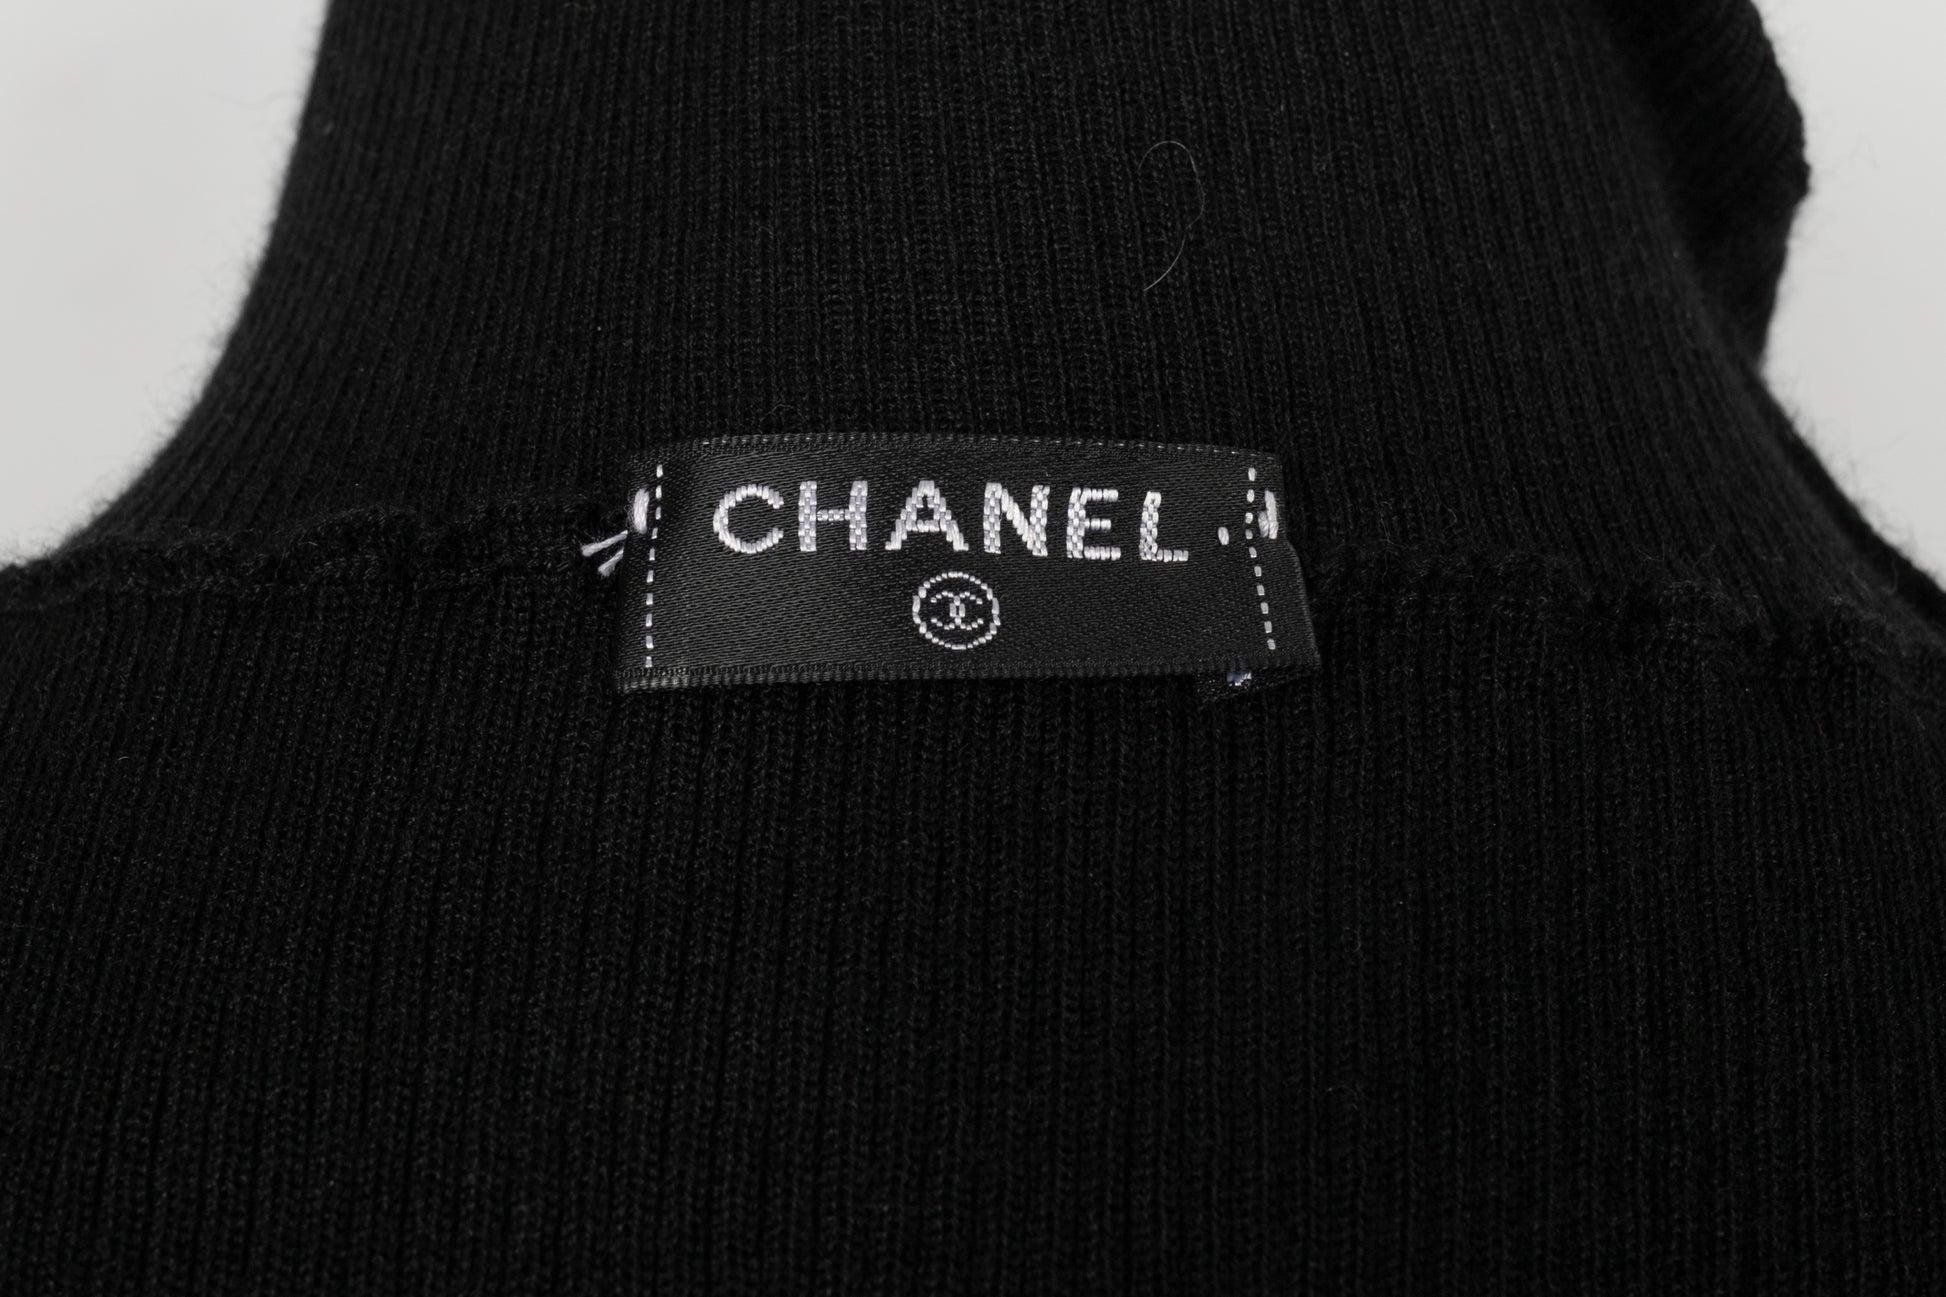 Chanel Black Cashmere and Wool Turtleneck Sweater 2